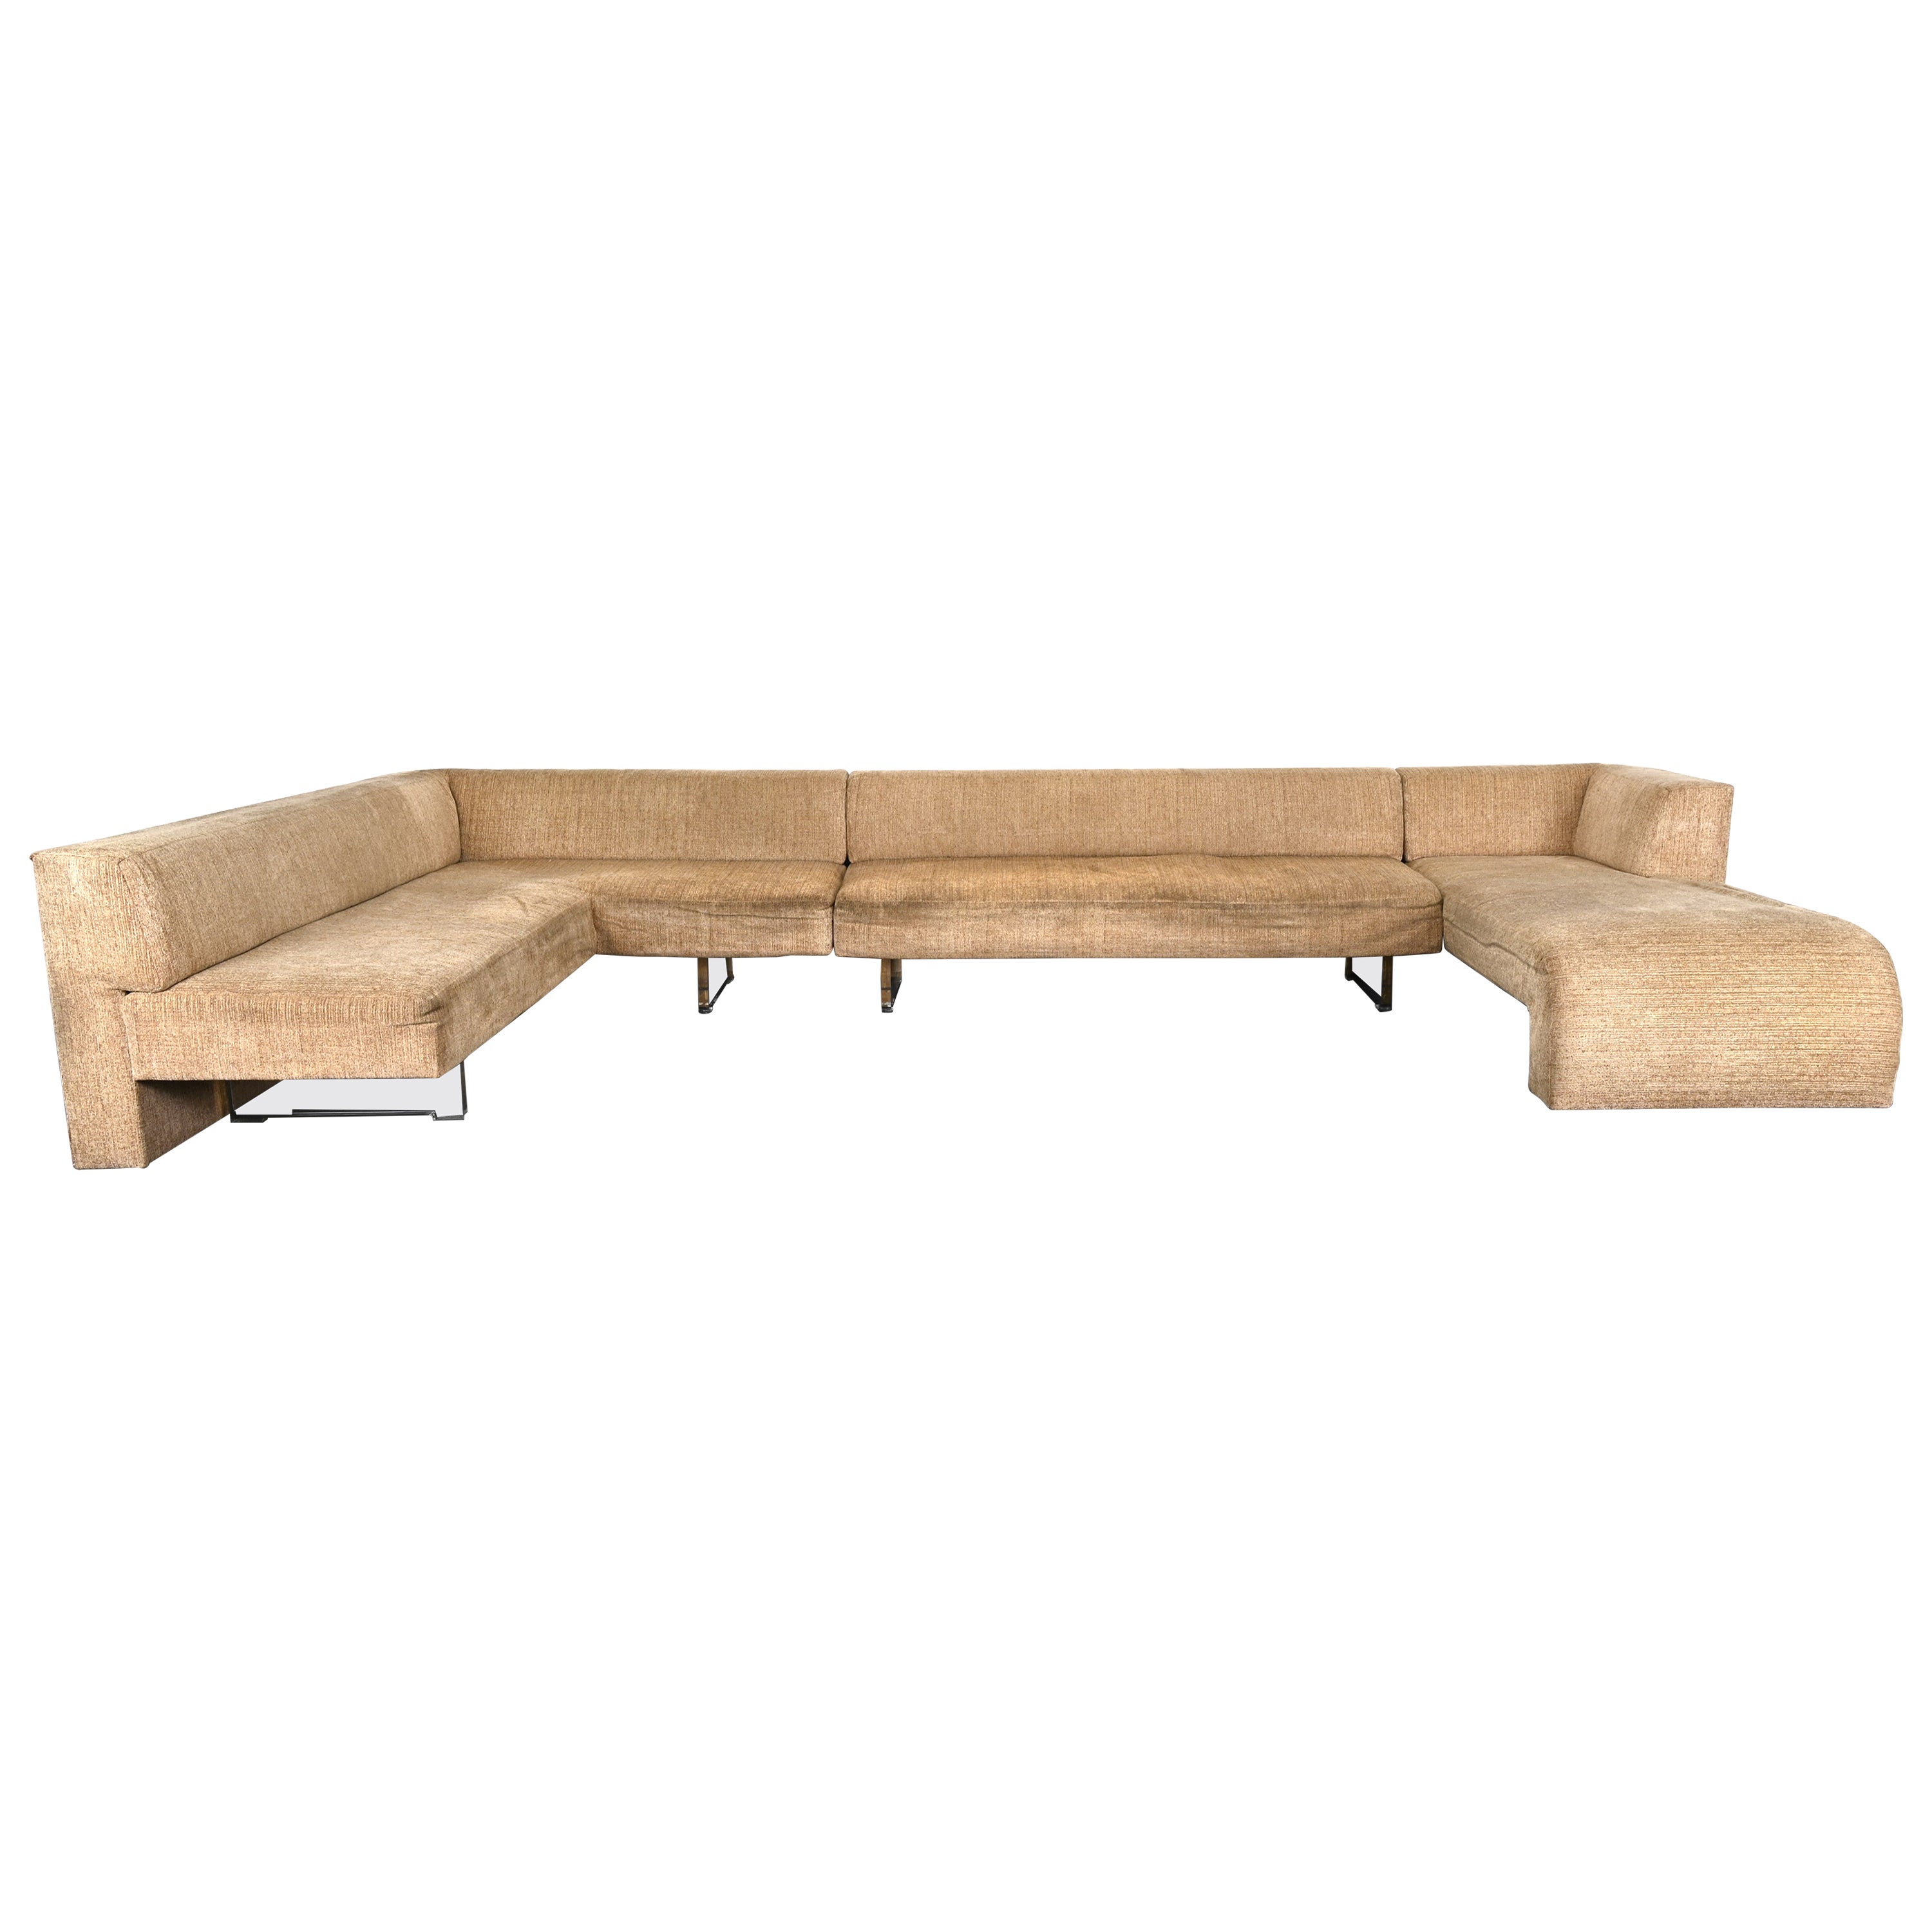 Monumental Sectional Sofa Designed by Vladimir Kagan, 1970s For Sale